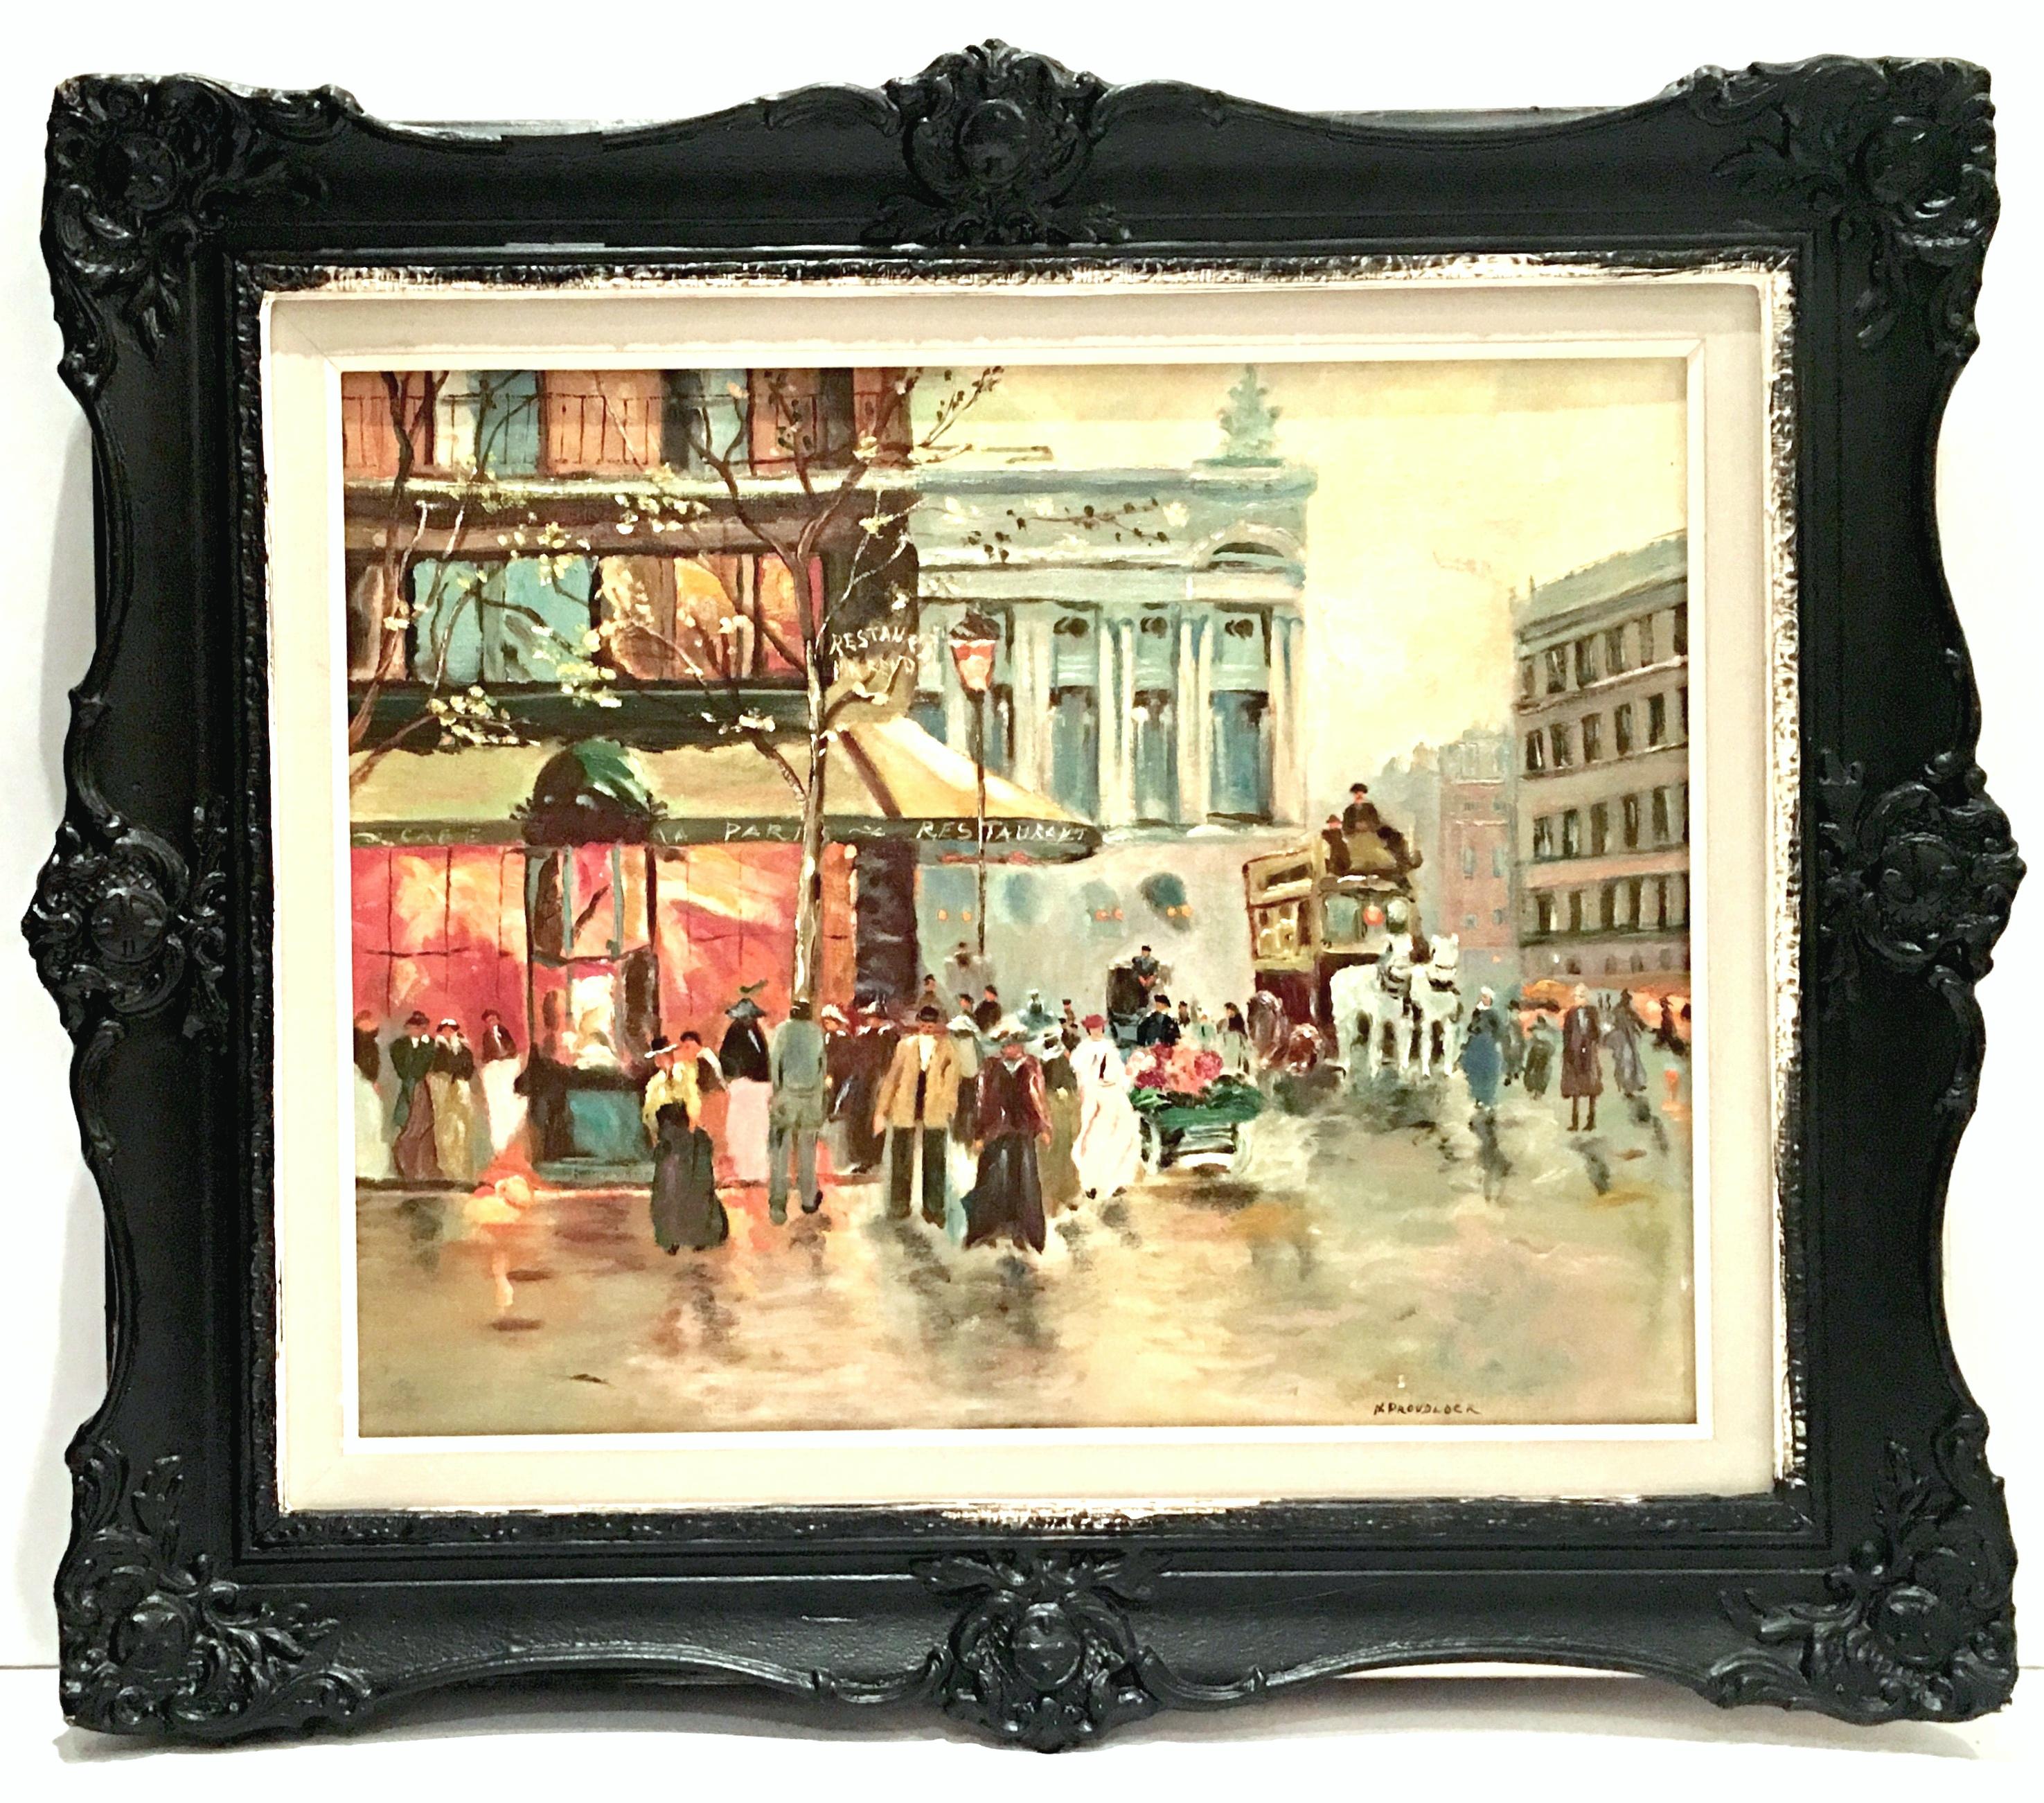 Mid-Century Impressionist Original Oil On Canvas Painting Signed Lower Right, N. Proudlock. 
This original piece of art is executed with great detail and impasto texture, using a combination of vivid and muted tones. Professionally framed in a